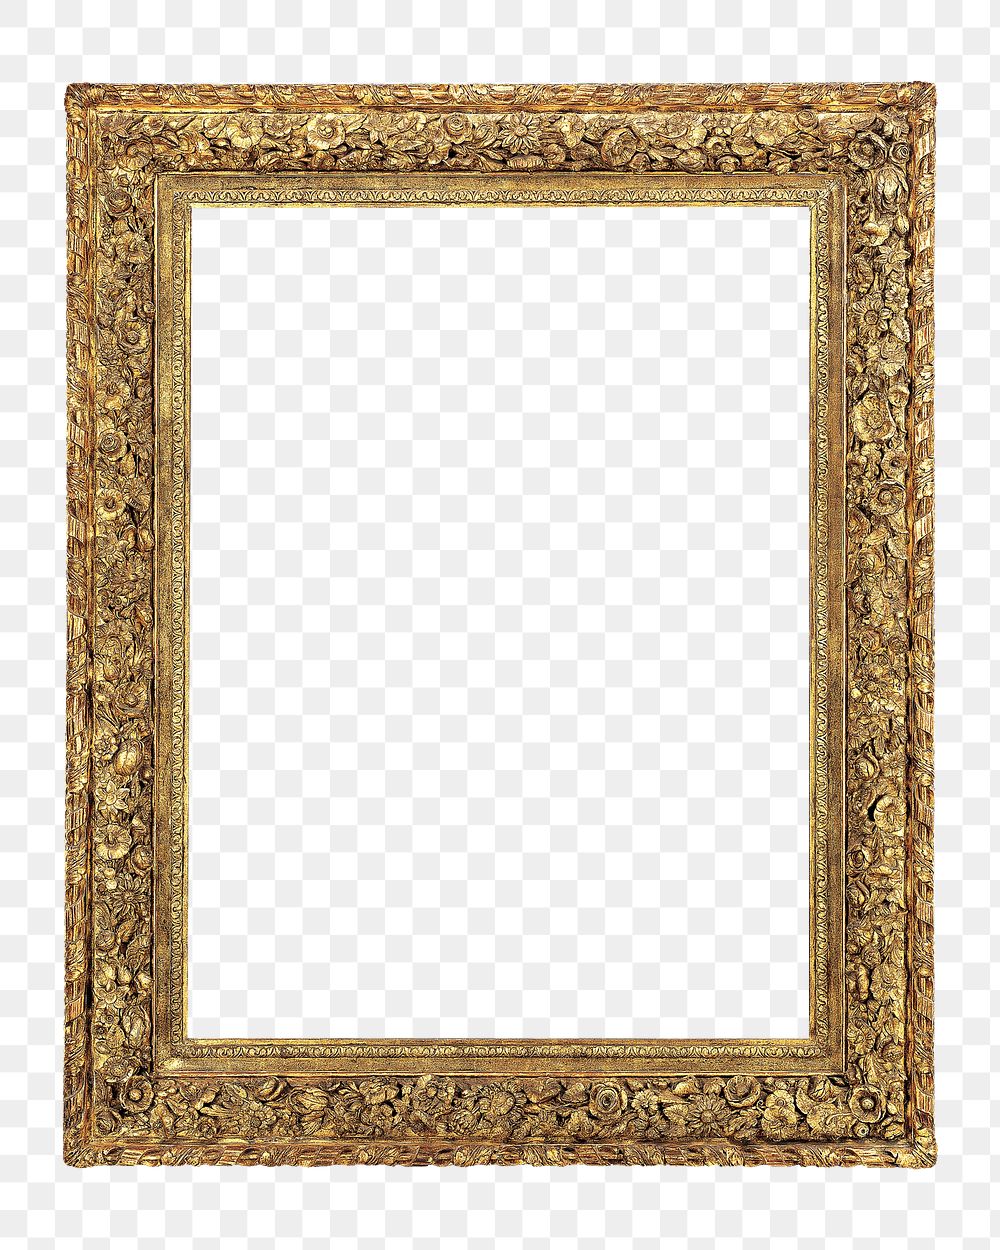 Gold ornate frame png, transparent background. Remixed by rawpixel.